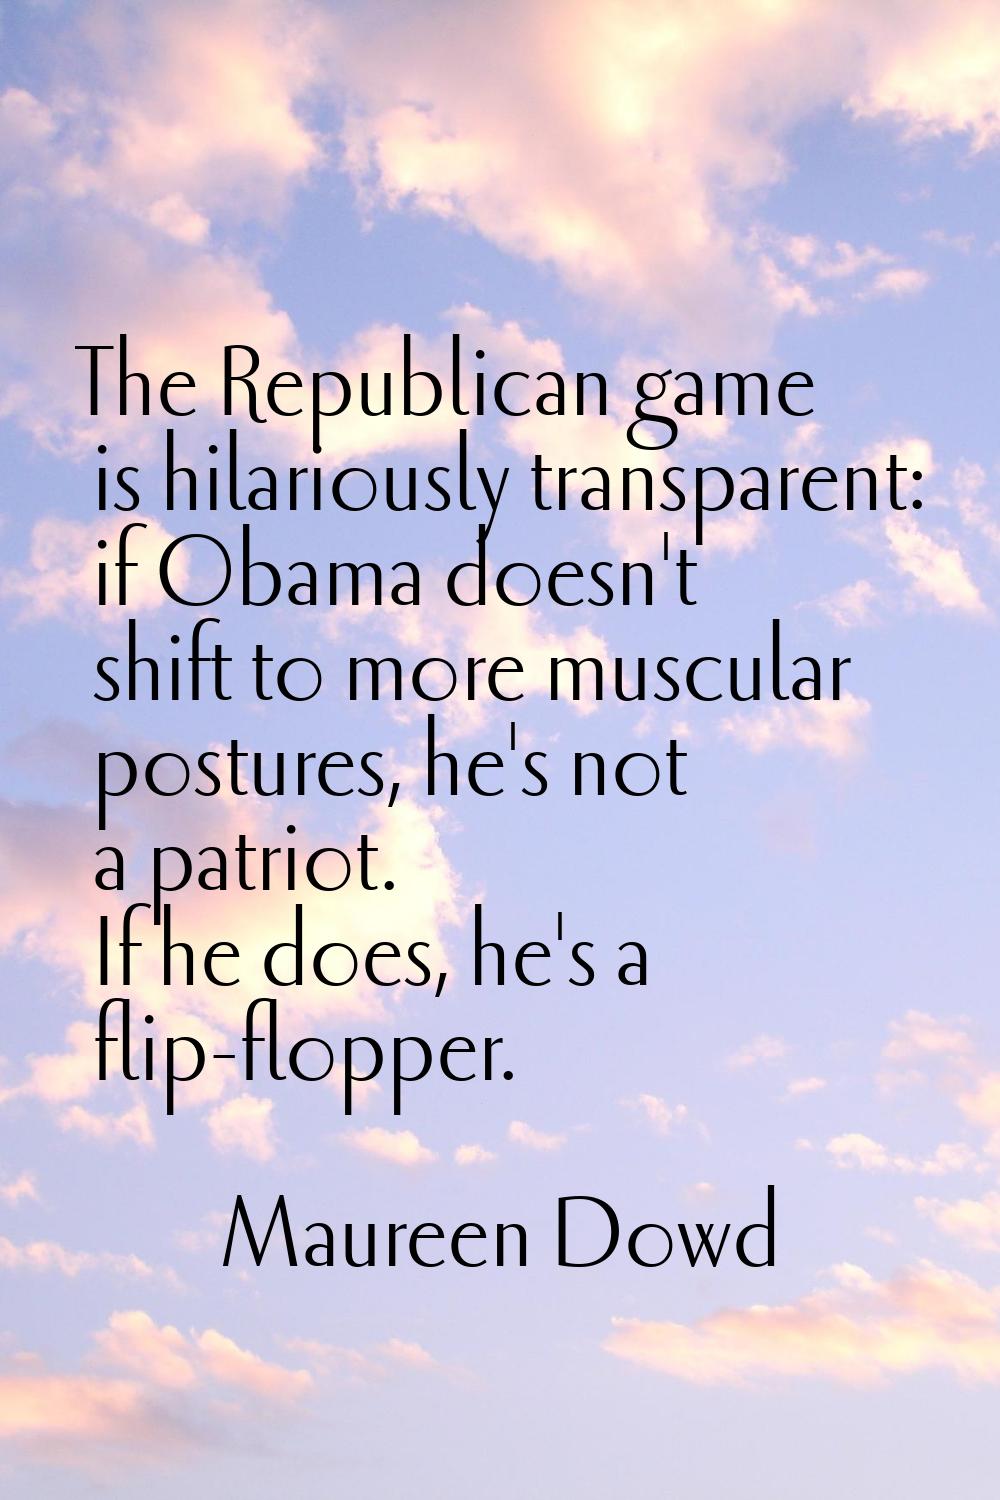 The Republican game is hilariously transparent: if Obama doesn't shift to more muscular postures, h